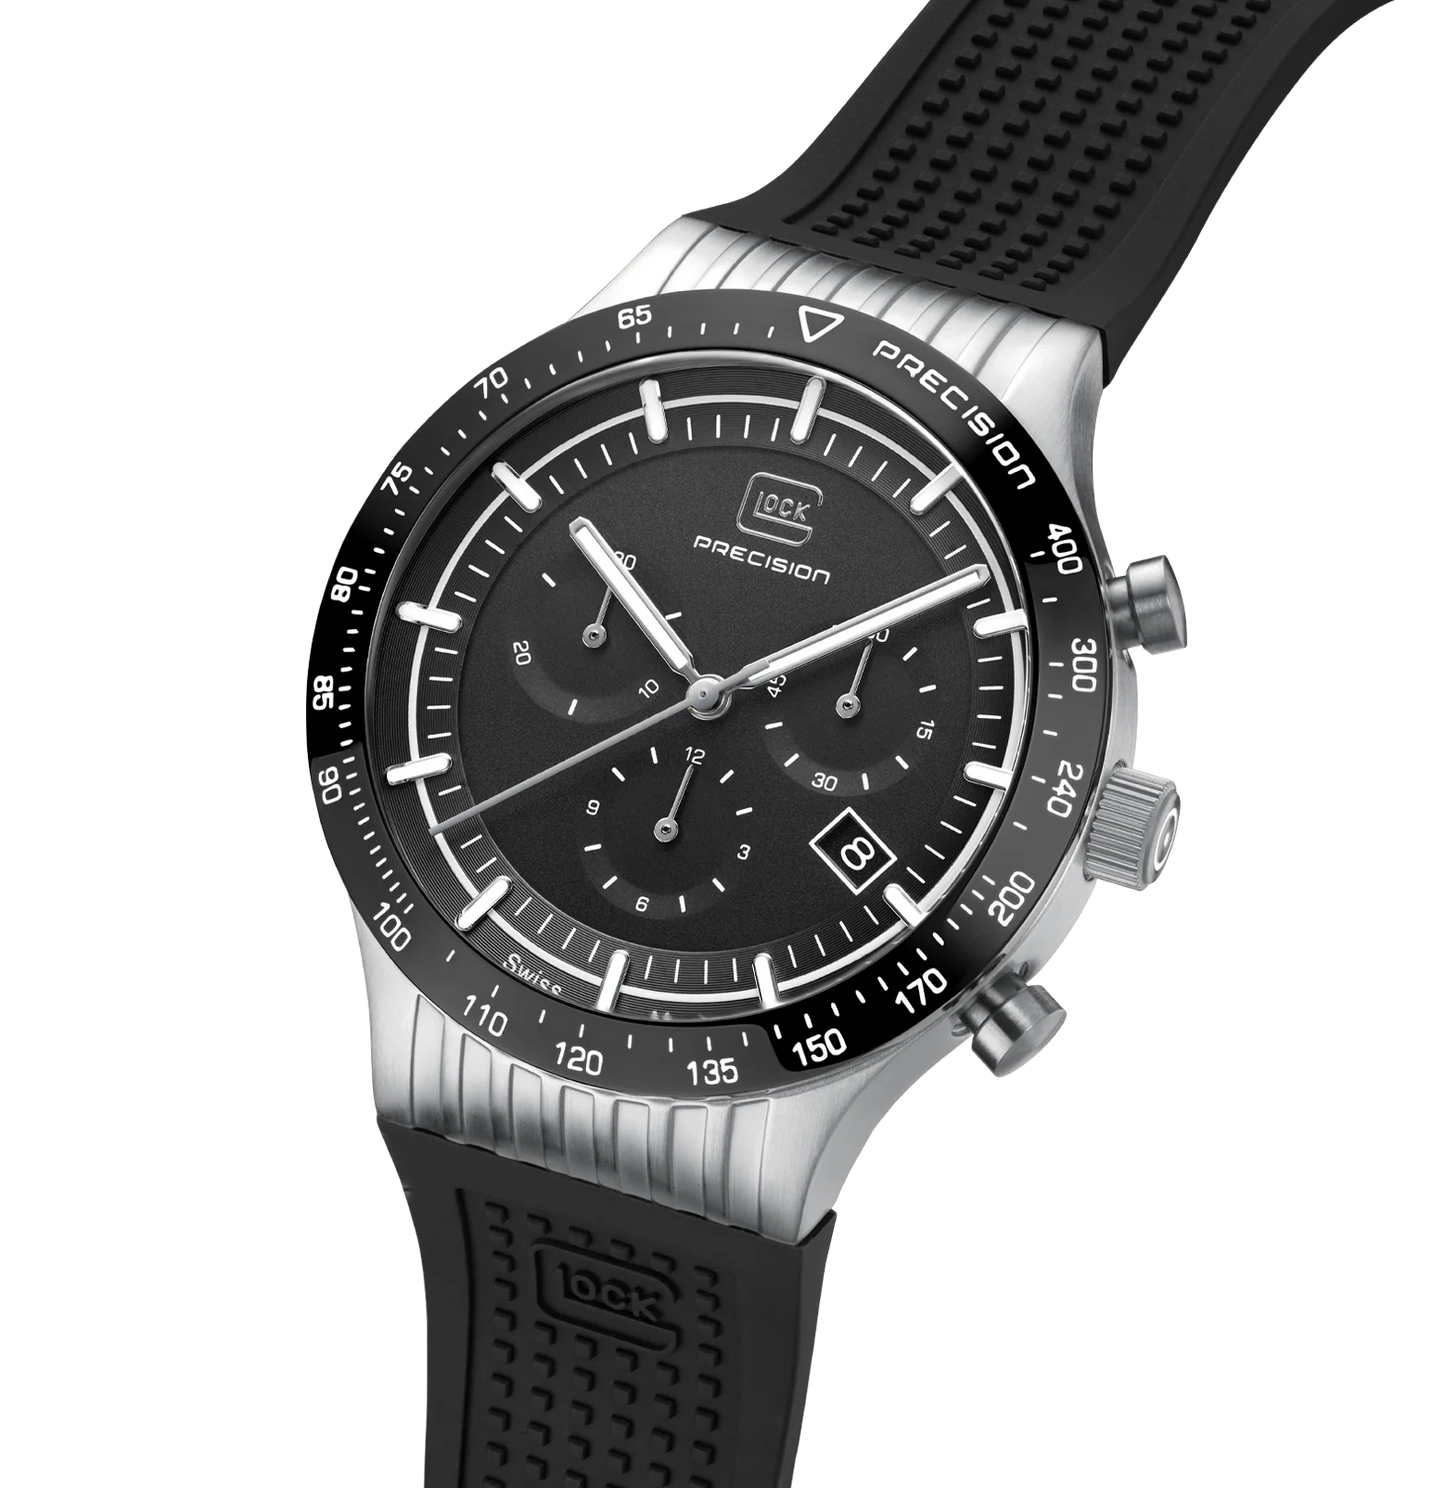 Men's Limited-Edition Glock Watch in Silver/ Black with 2 Straps